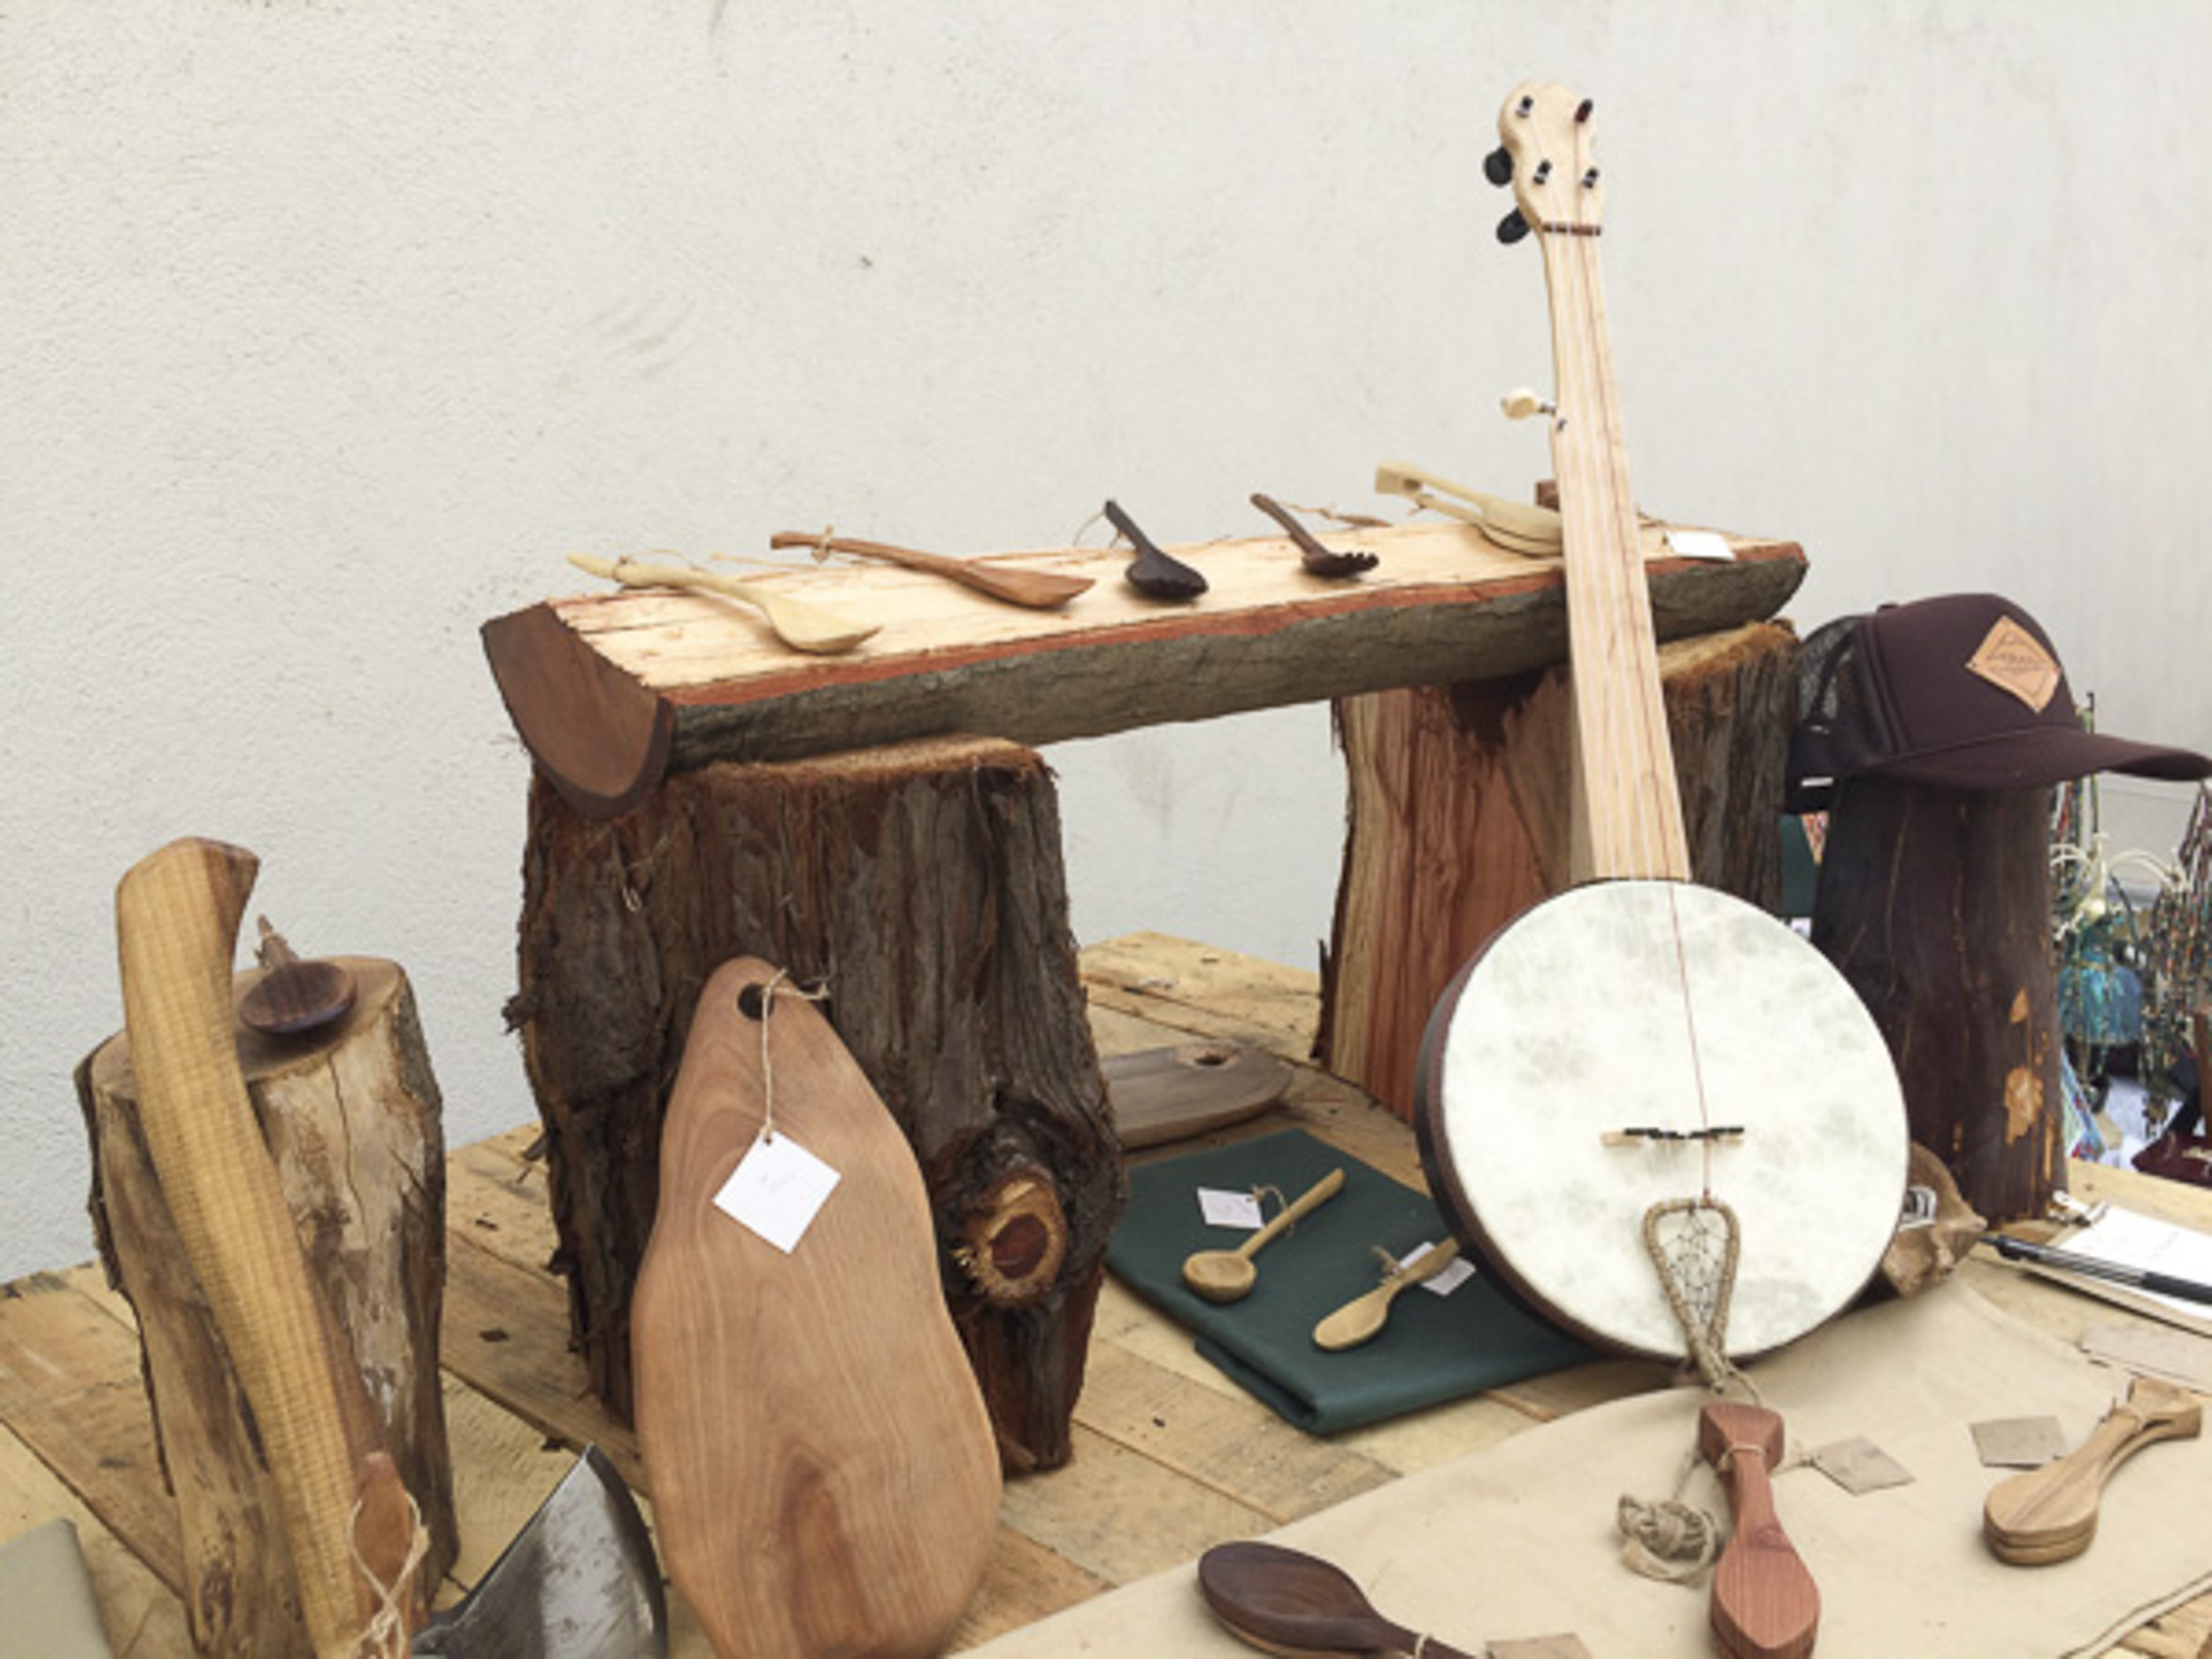 Hand Carved spoons for sale in the Santa Cruz Mountains